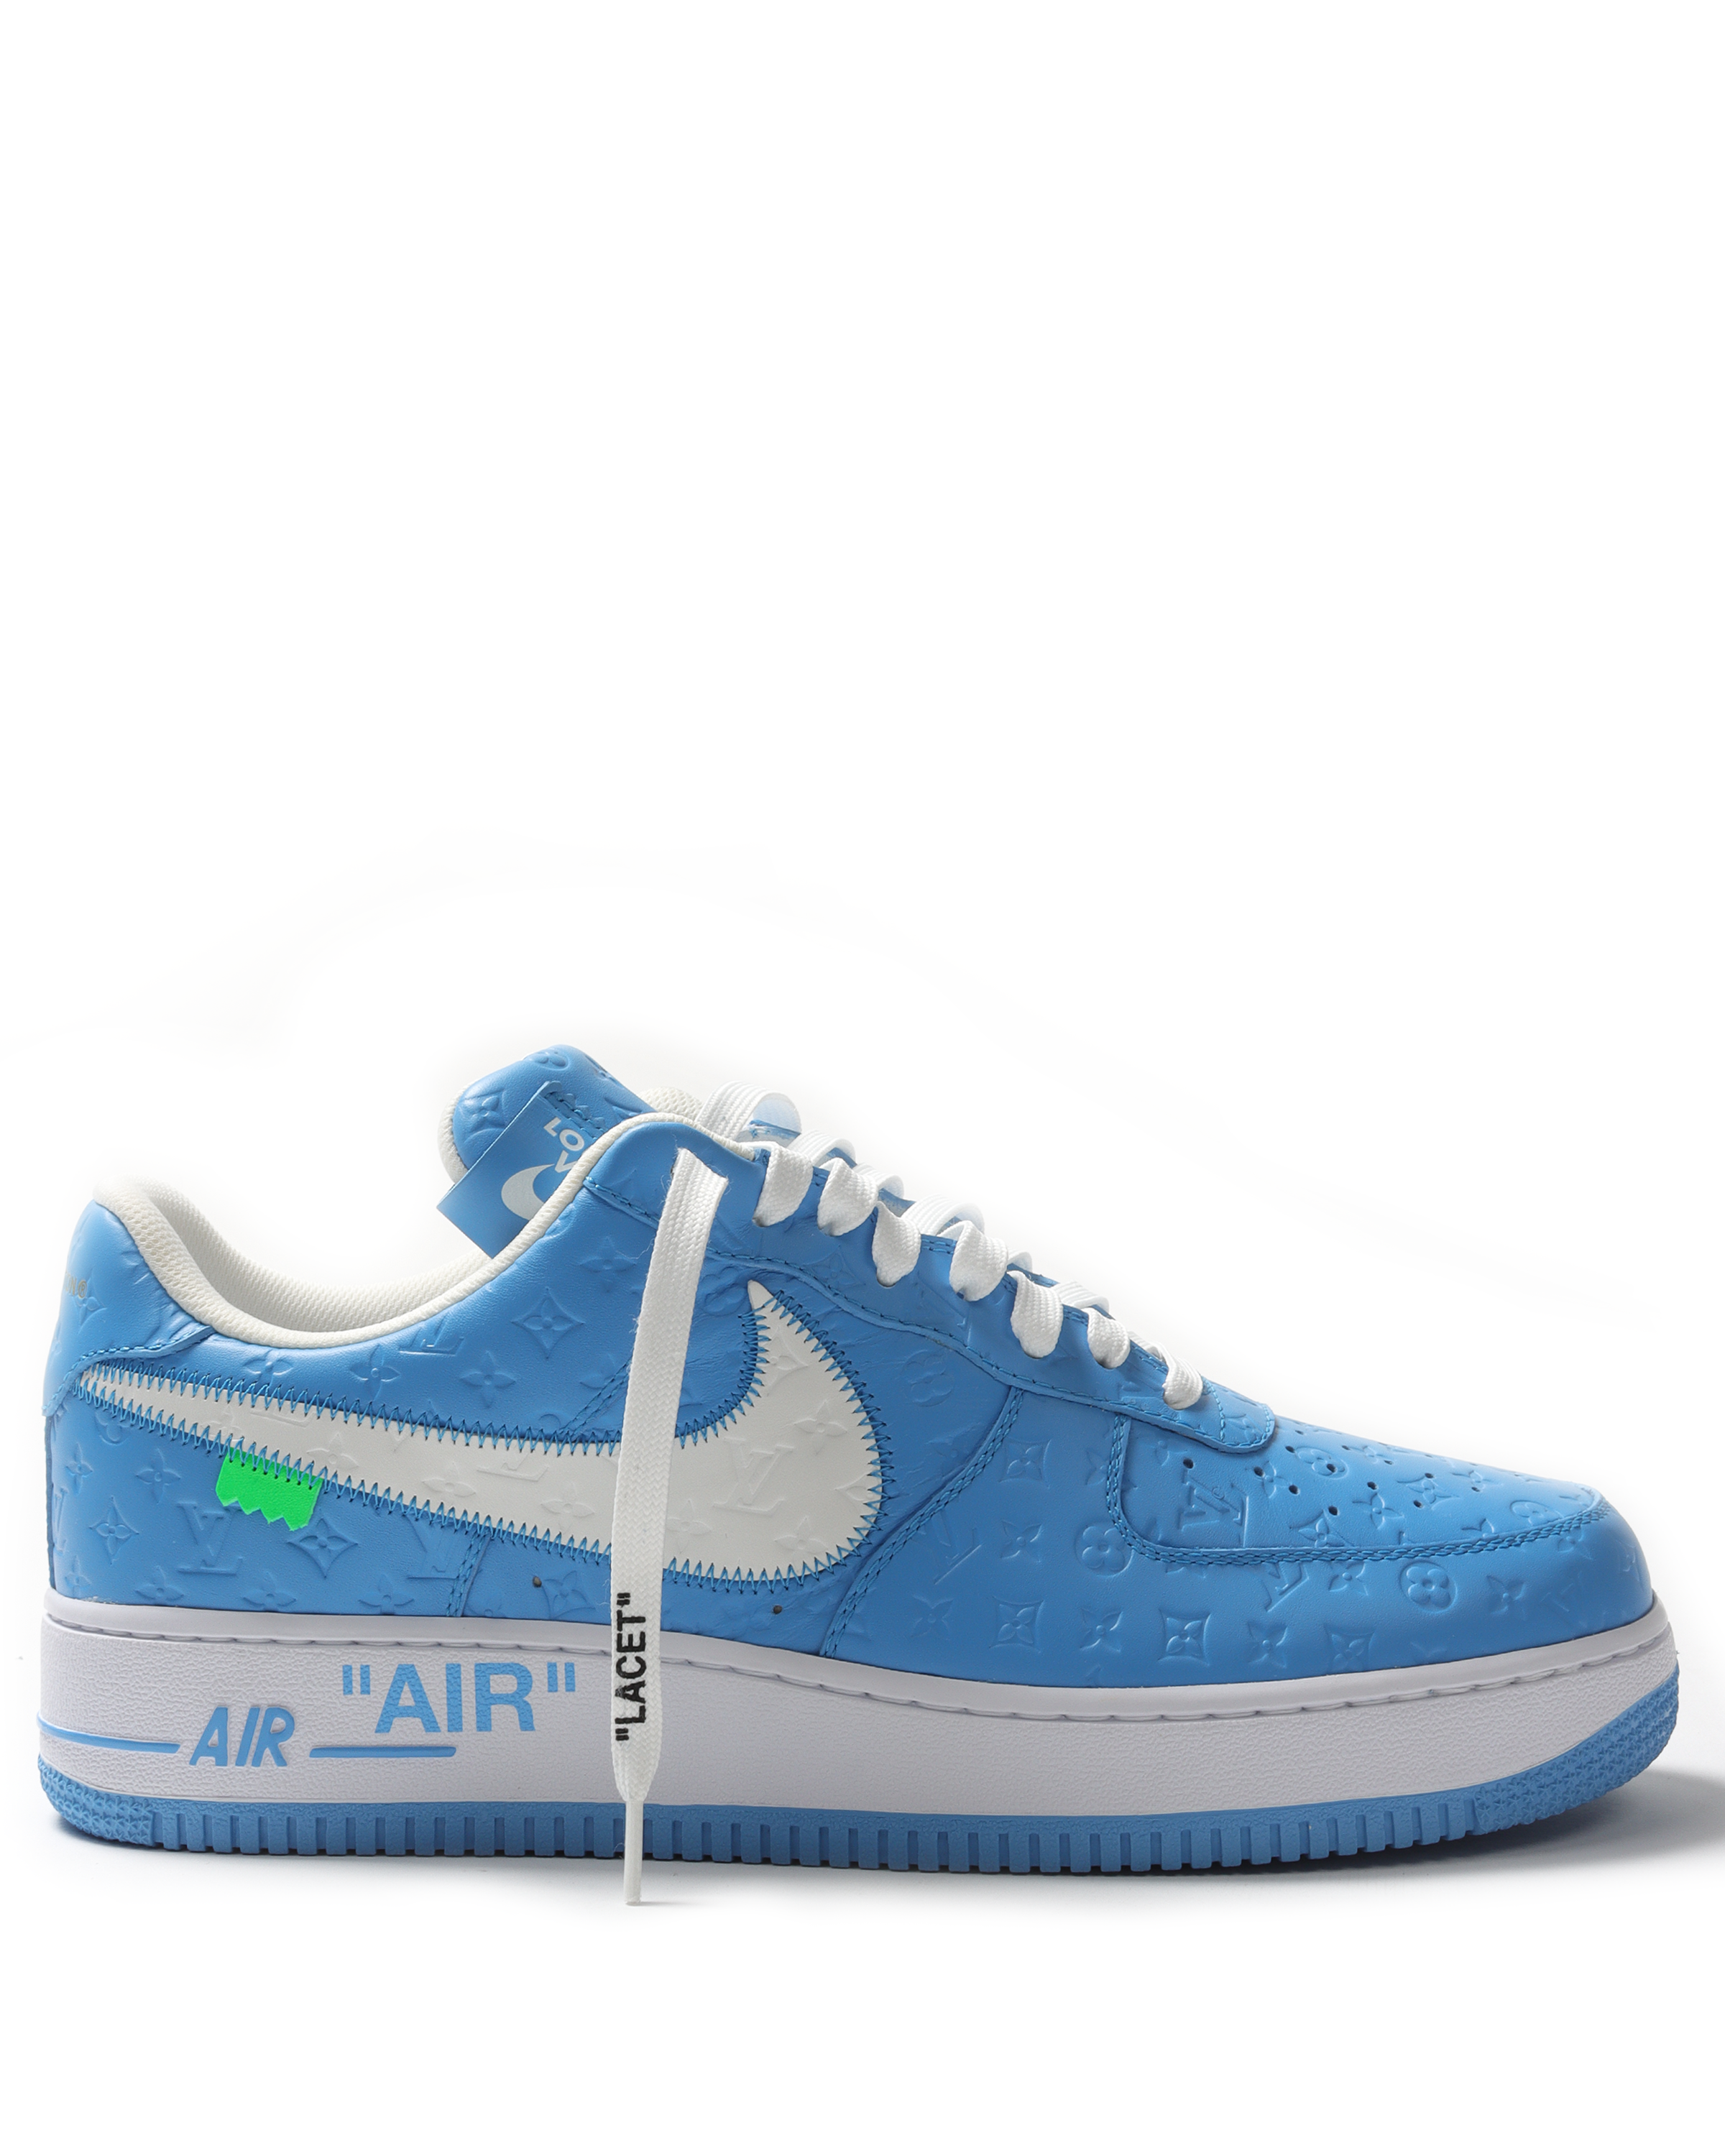 New Nike x Louis Vuitton Air Force 1 Sneakers by V. Abloh in white and  blue For Sale at 1stDibs